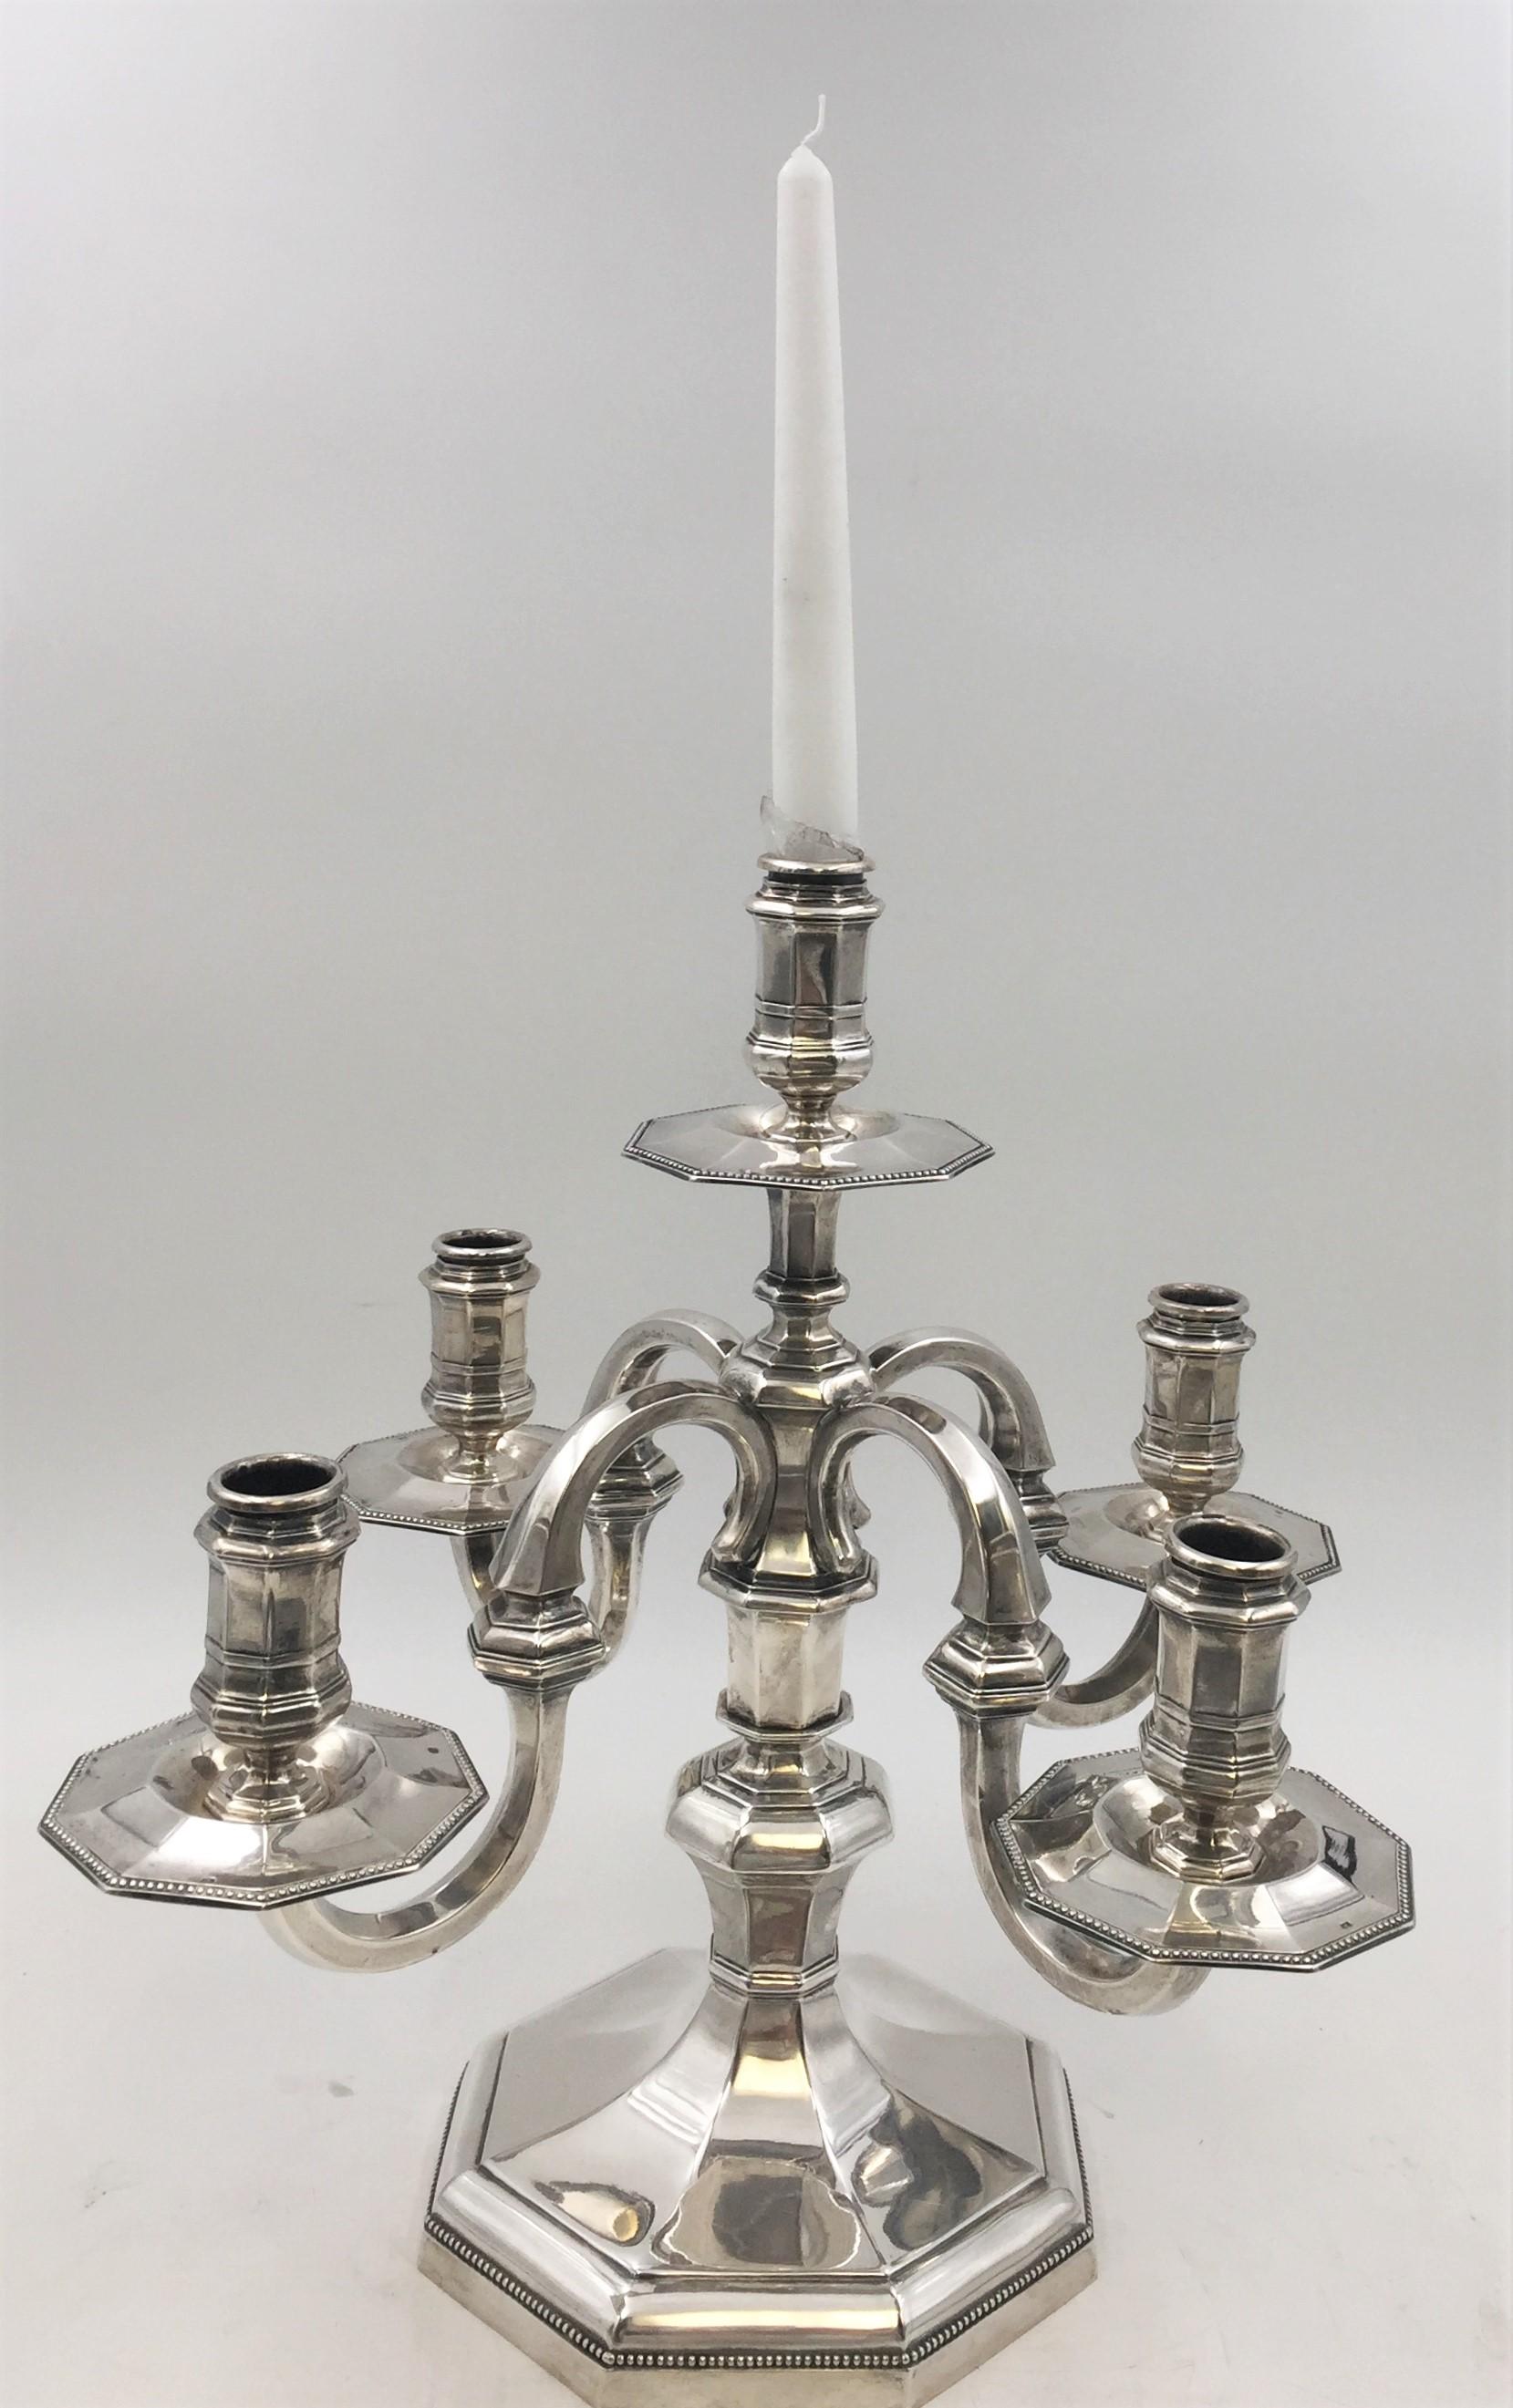 A beautiful pair of continental silver five light candelabras, 20th century. Designed with a smooth multi faceted surface and detailed beading around the base and bobéches. Weighing 92 troy ounces, measuring 14.5 inches in height and 15.8 inches